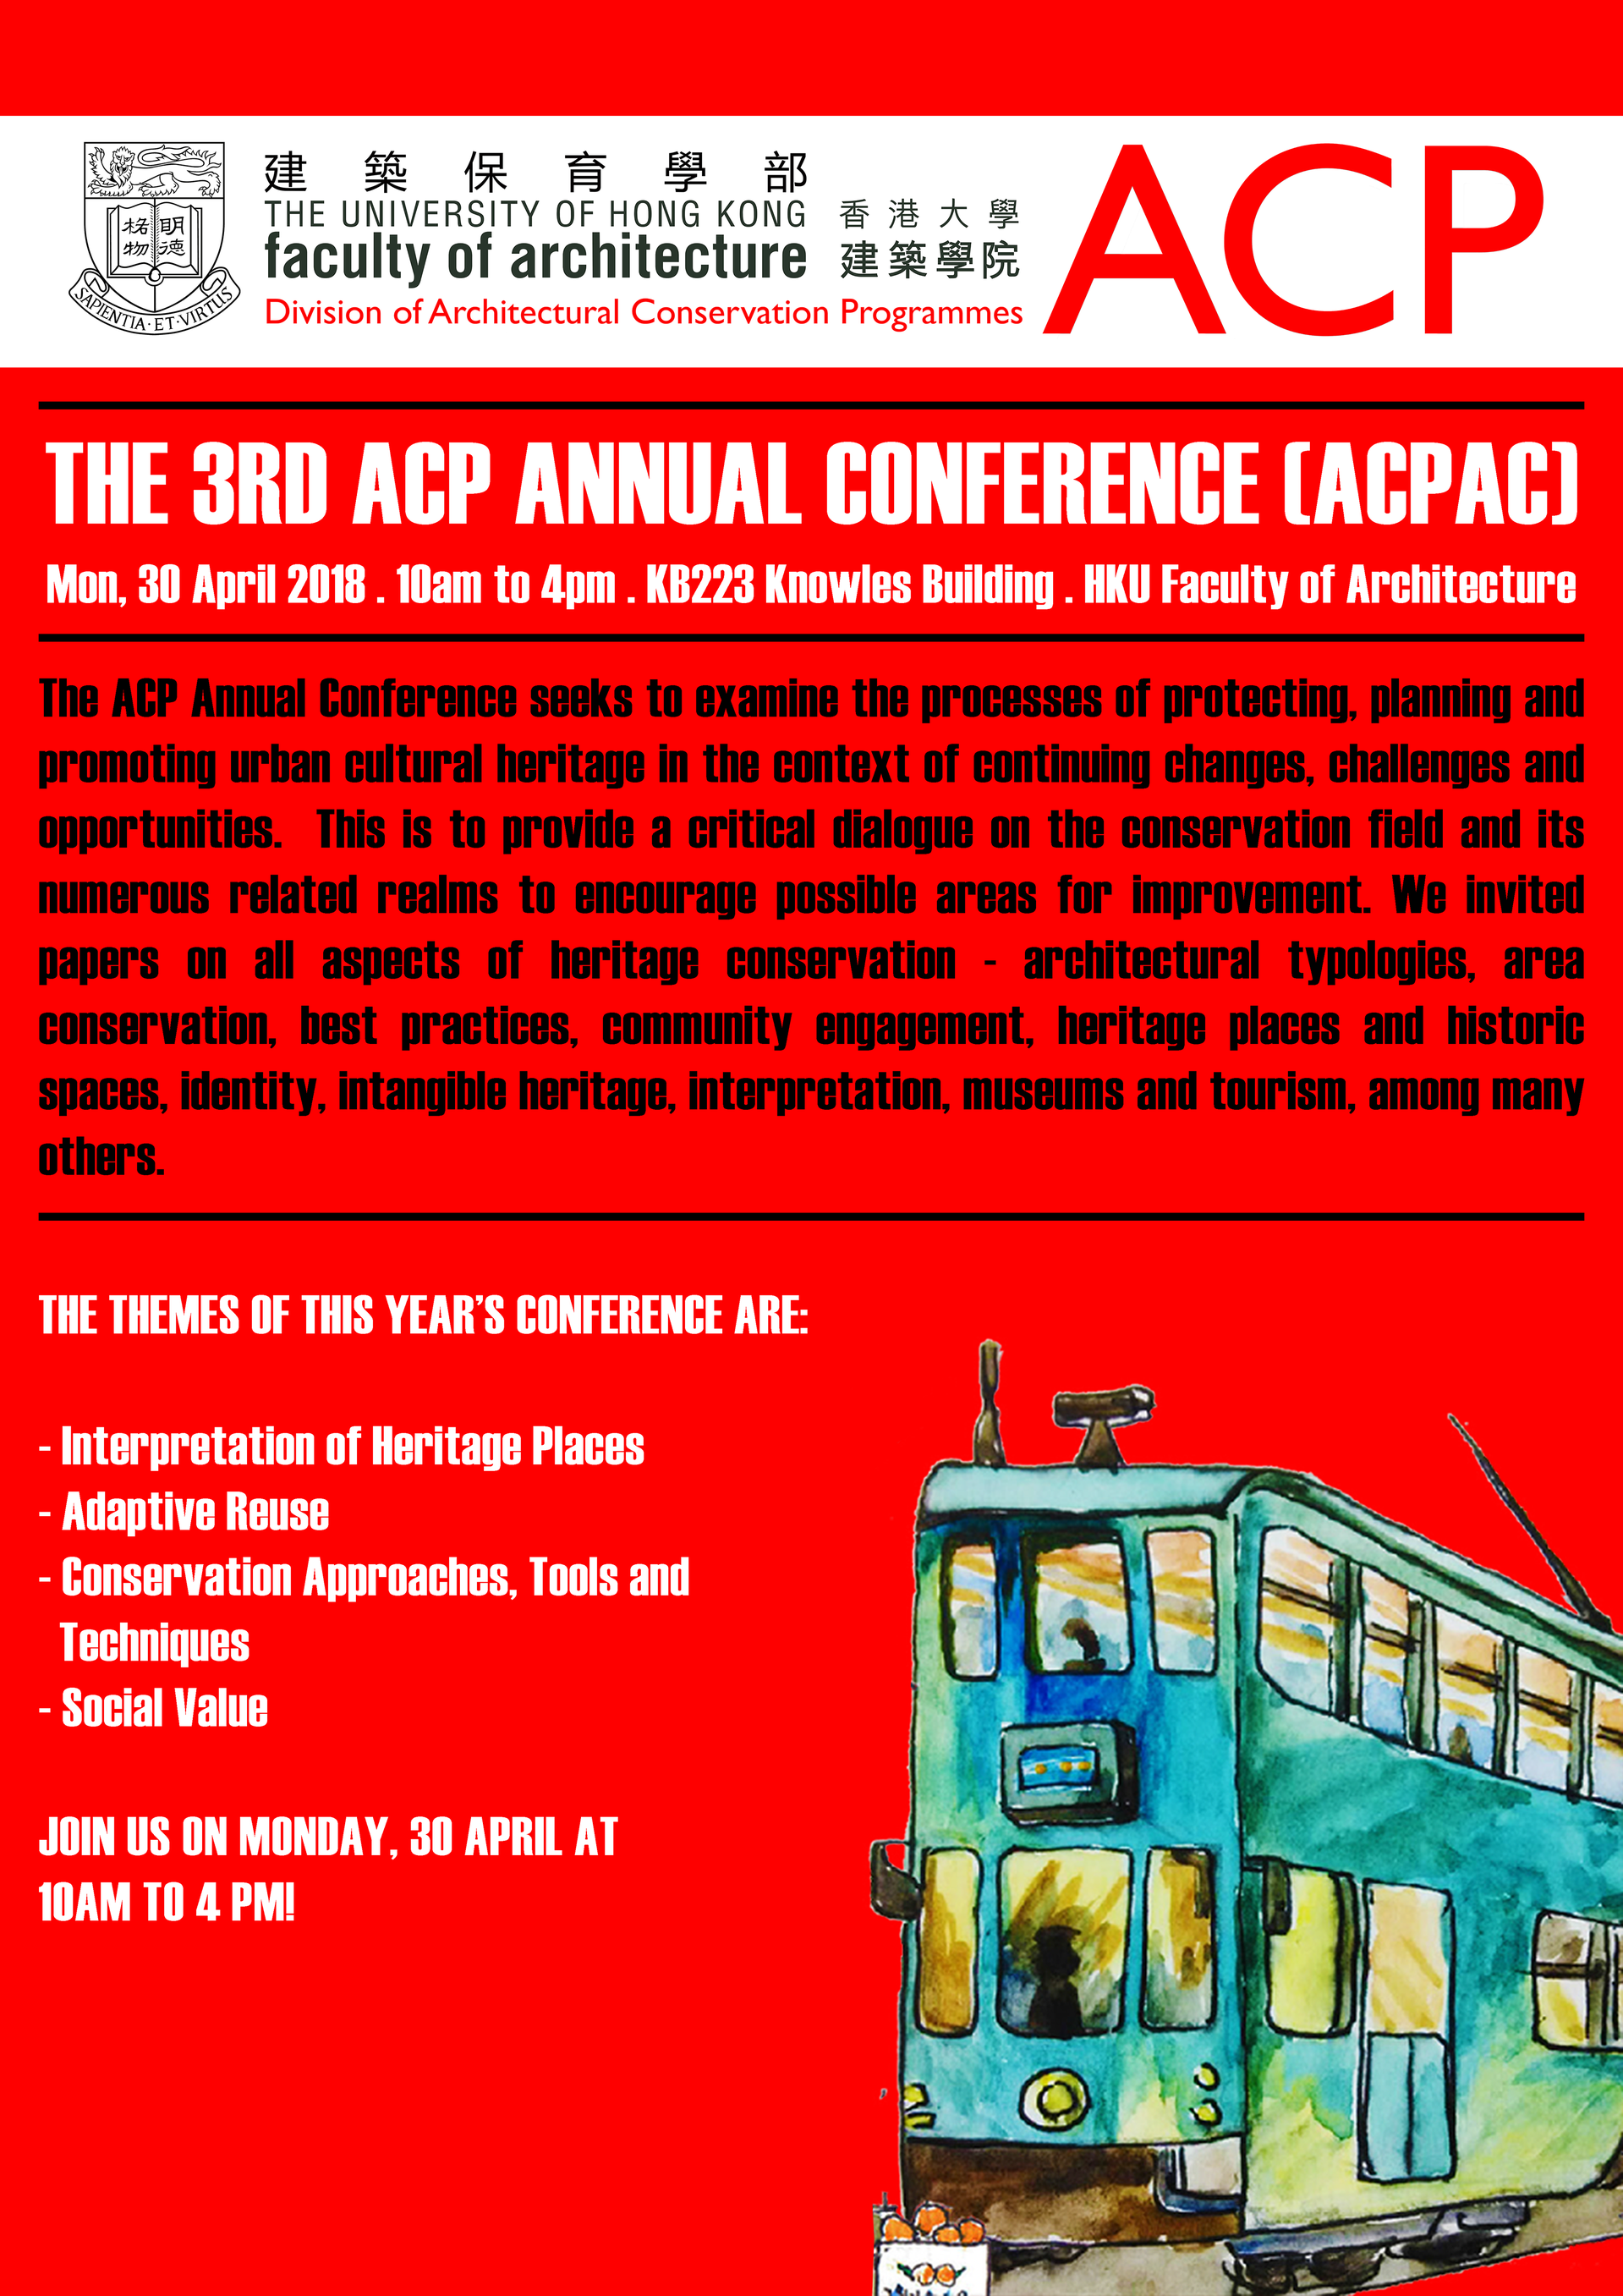 The 3rd ACP Annual Conference